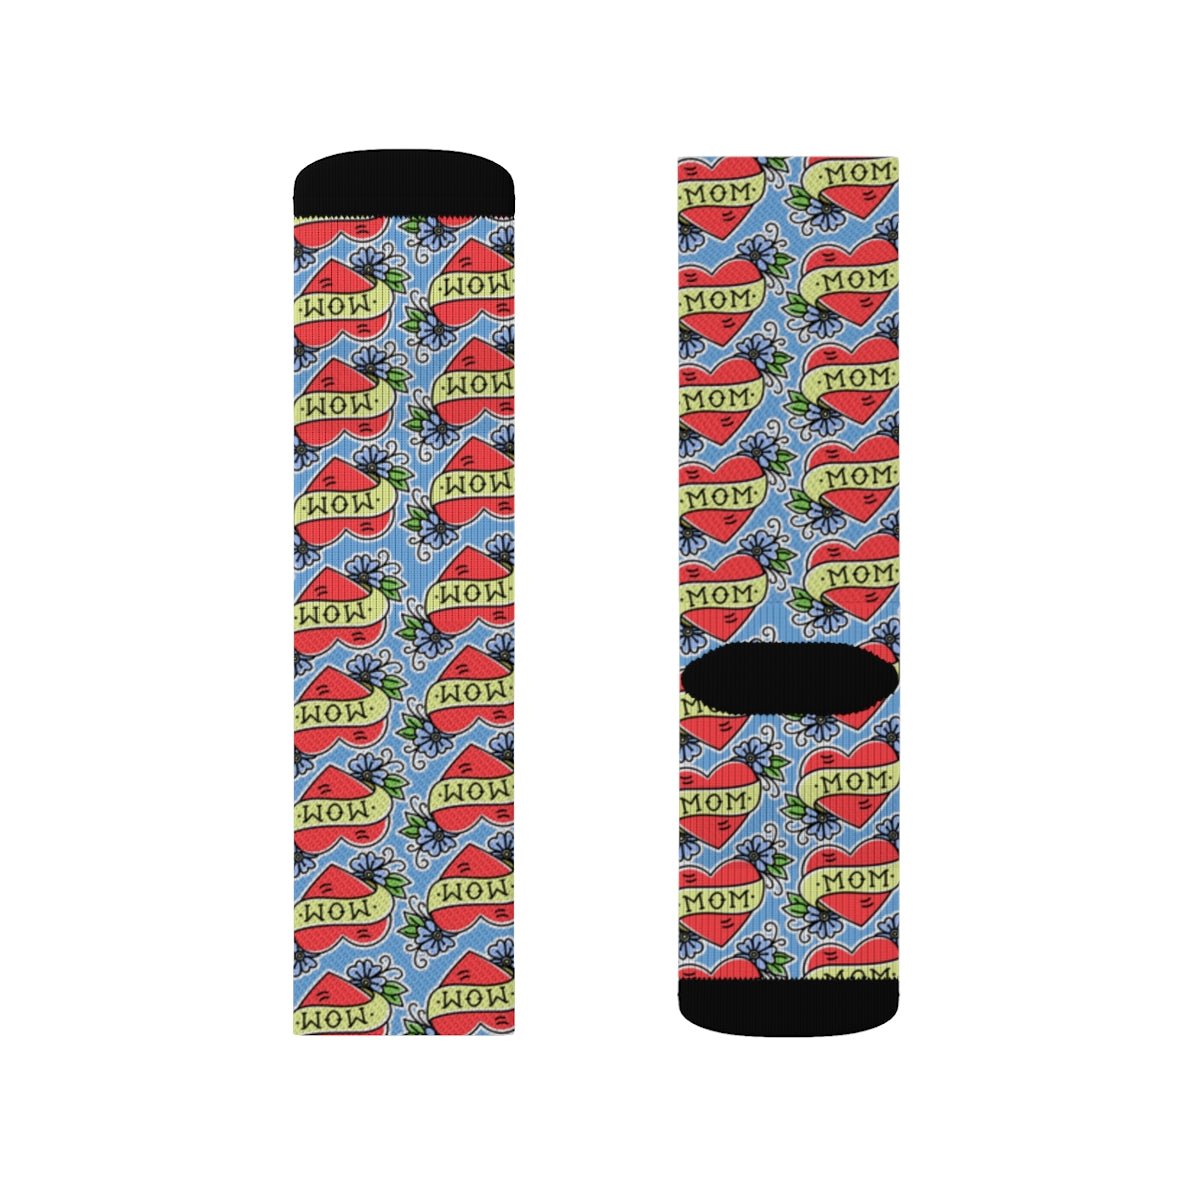 Mom Hearts and Flowers Socks Mother Love Sox Leggings Blue Red Gift Sweetheart Daughter Son